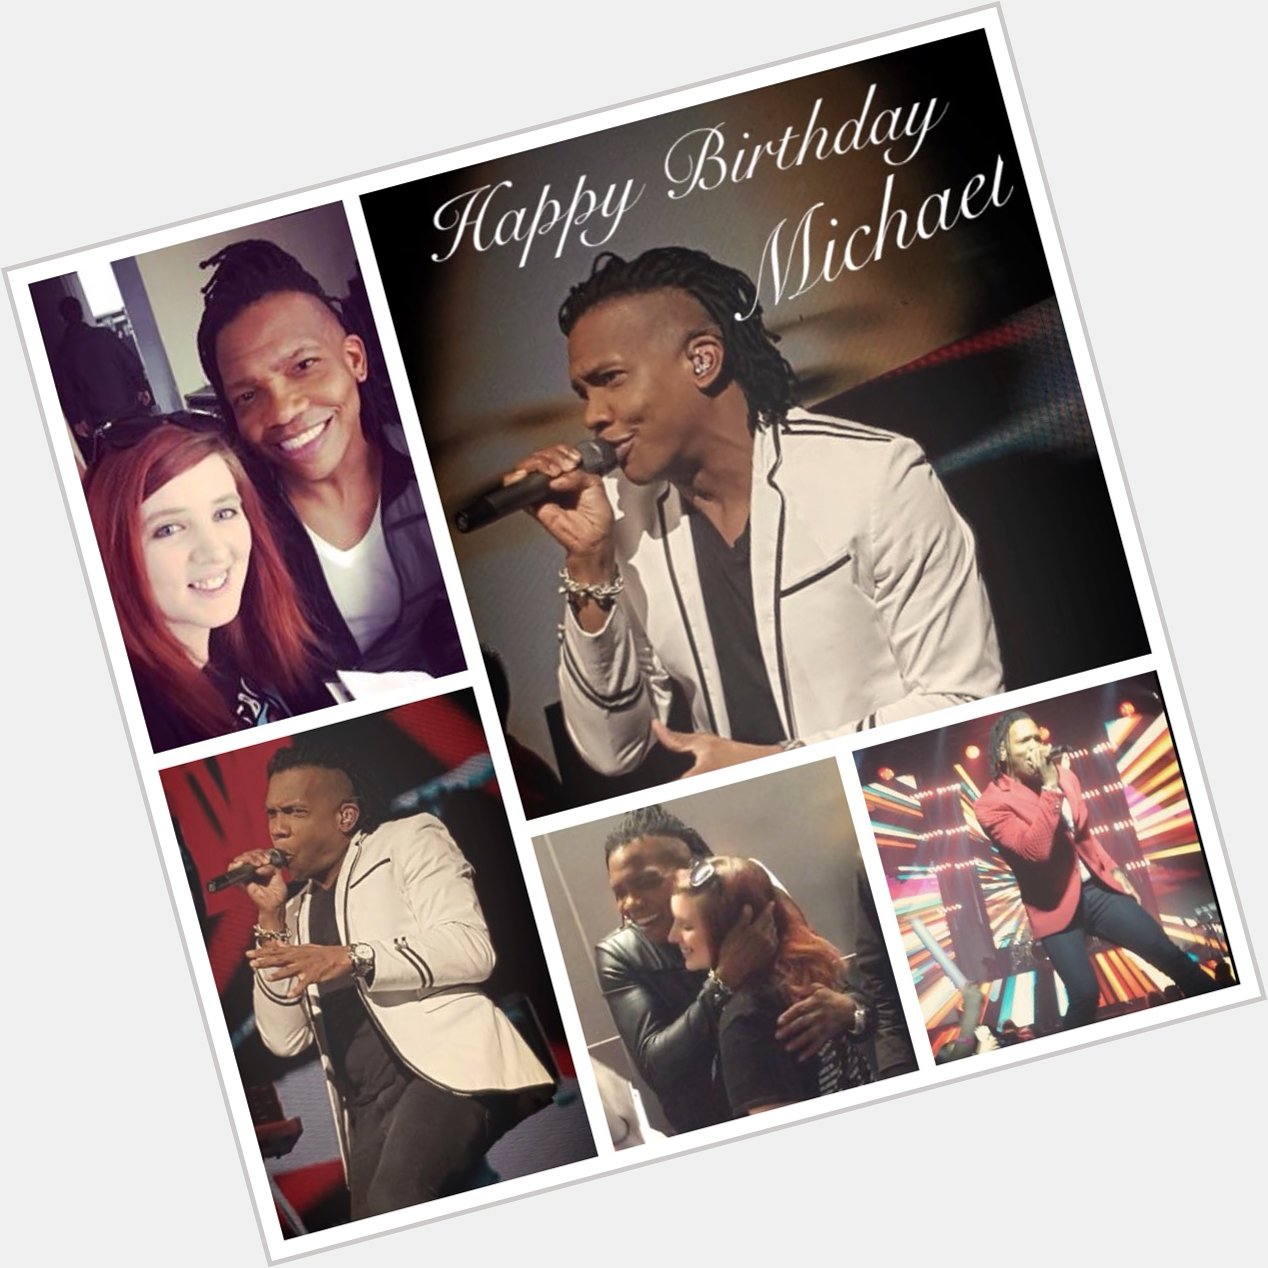 Wishing You A Happy and Blessed Birthday Today Michael Tait!!!  Hope you have an Awesome day!!!  